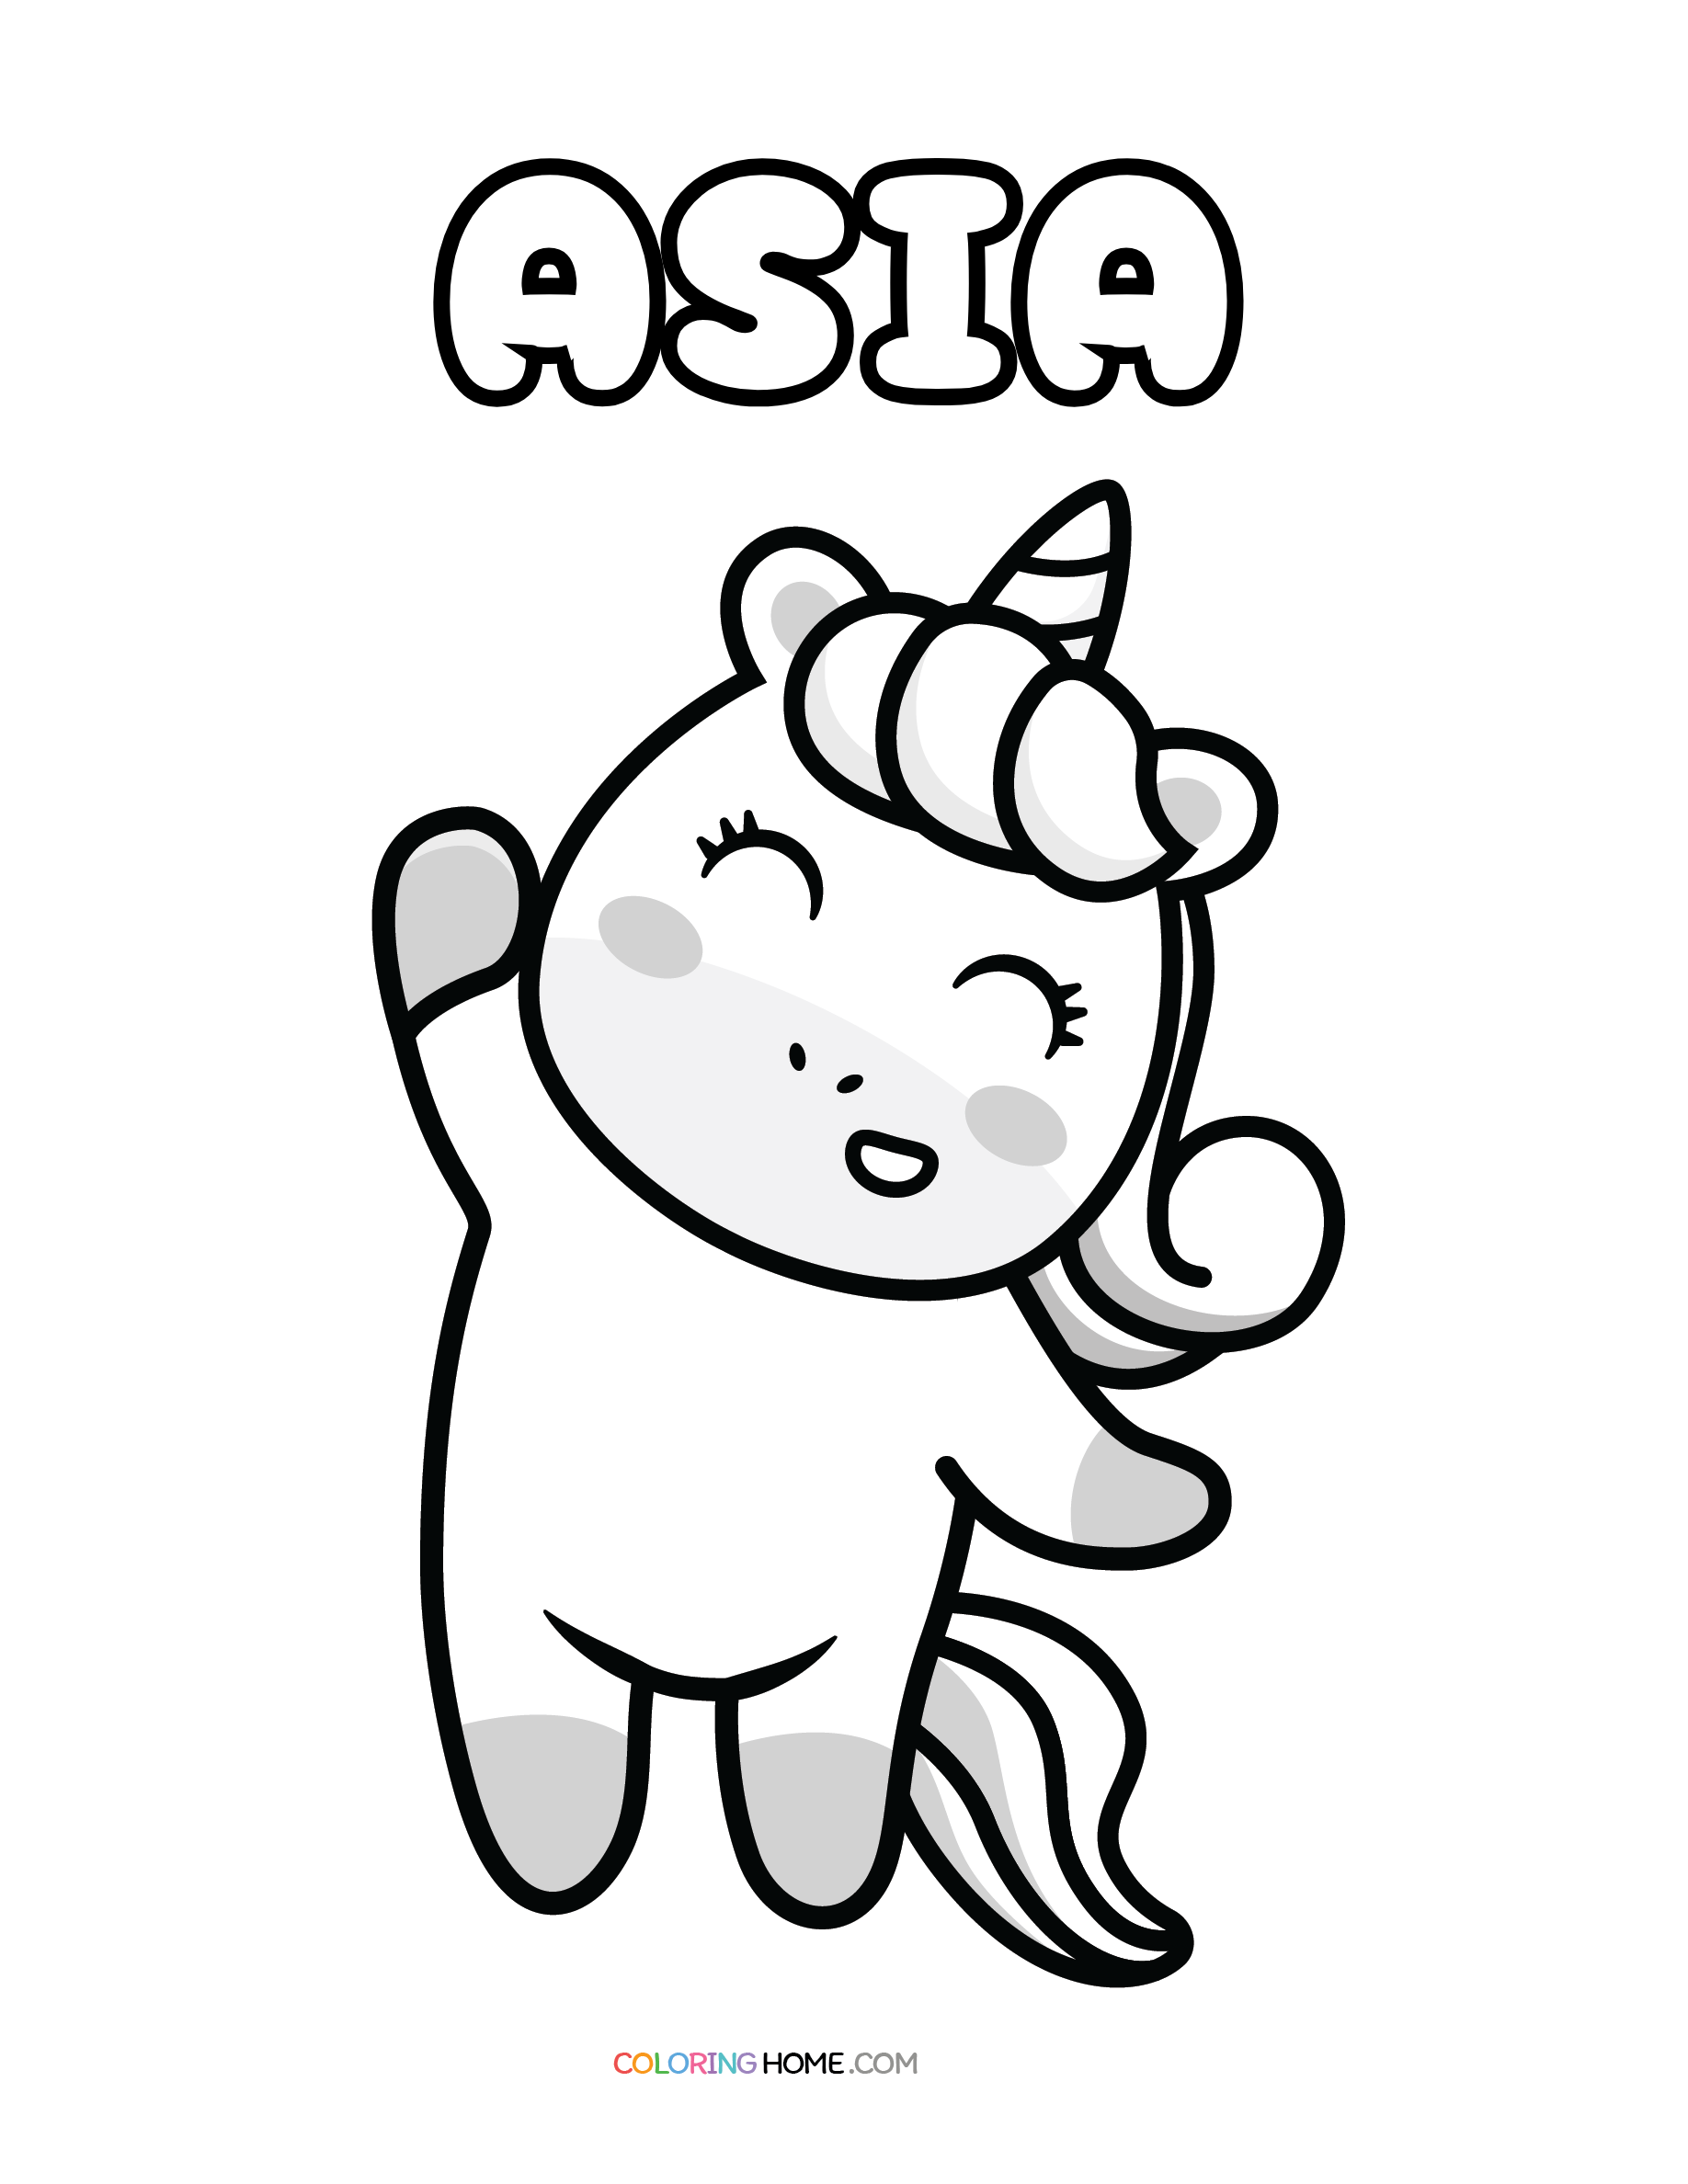 Asia unicorn coloring page